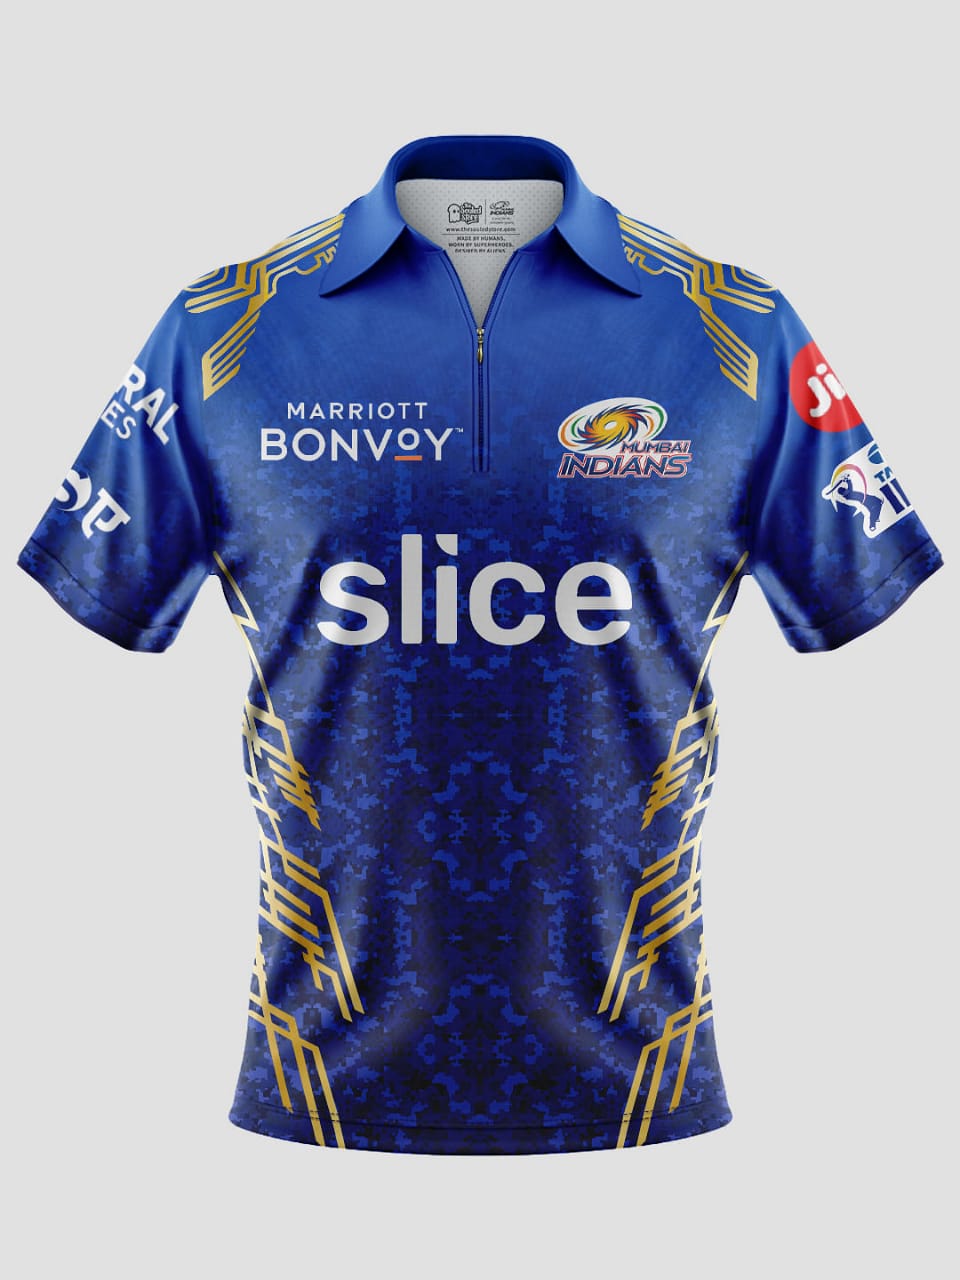 IPL 2022: With two weeks to go, Delhi Capitals, Mumbai Indians launch new kits for new season - check pics